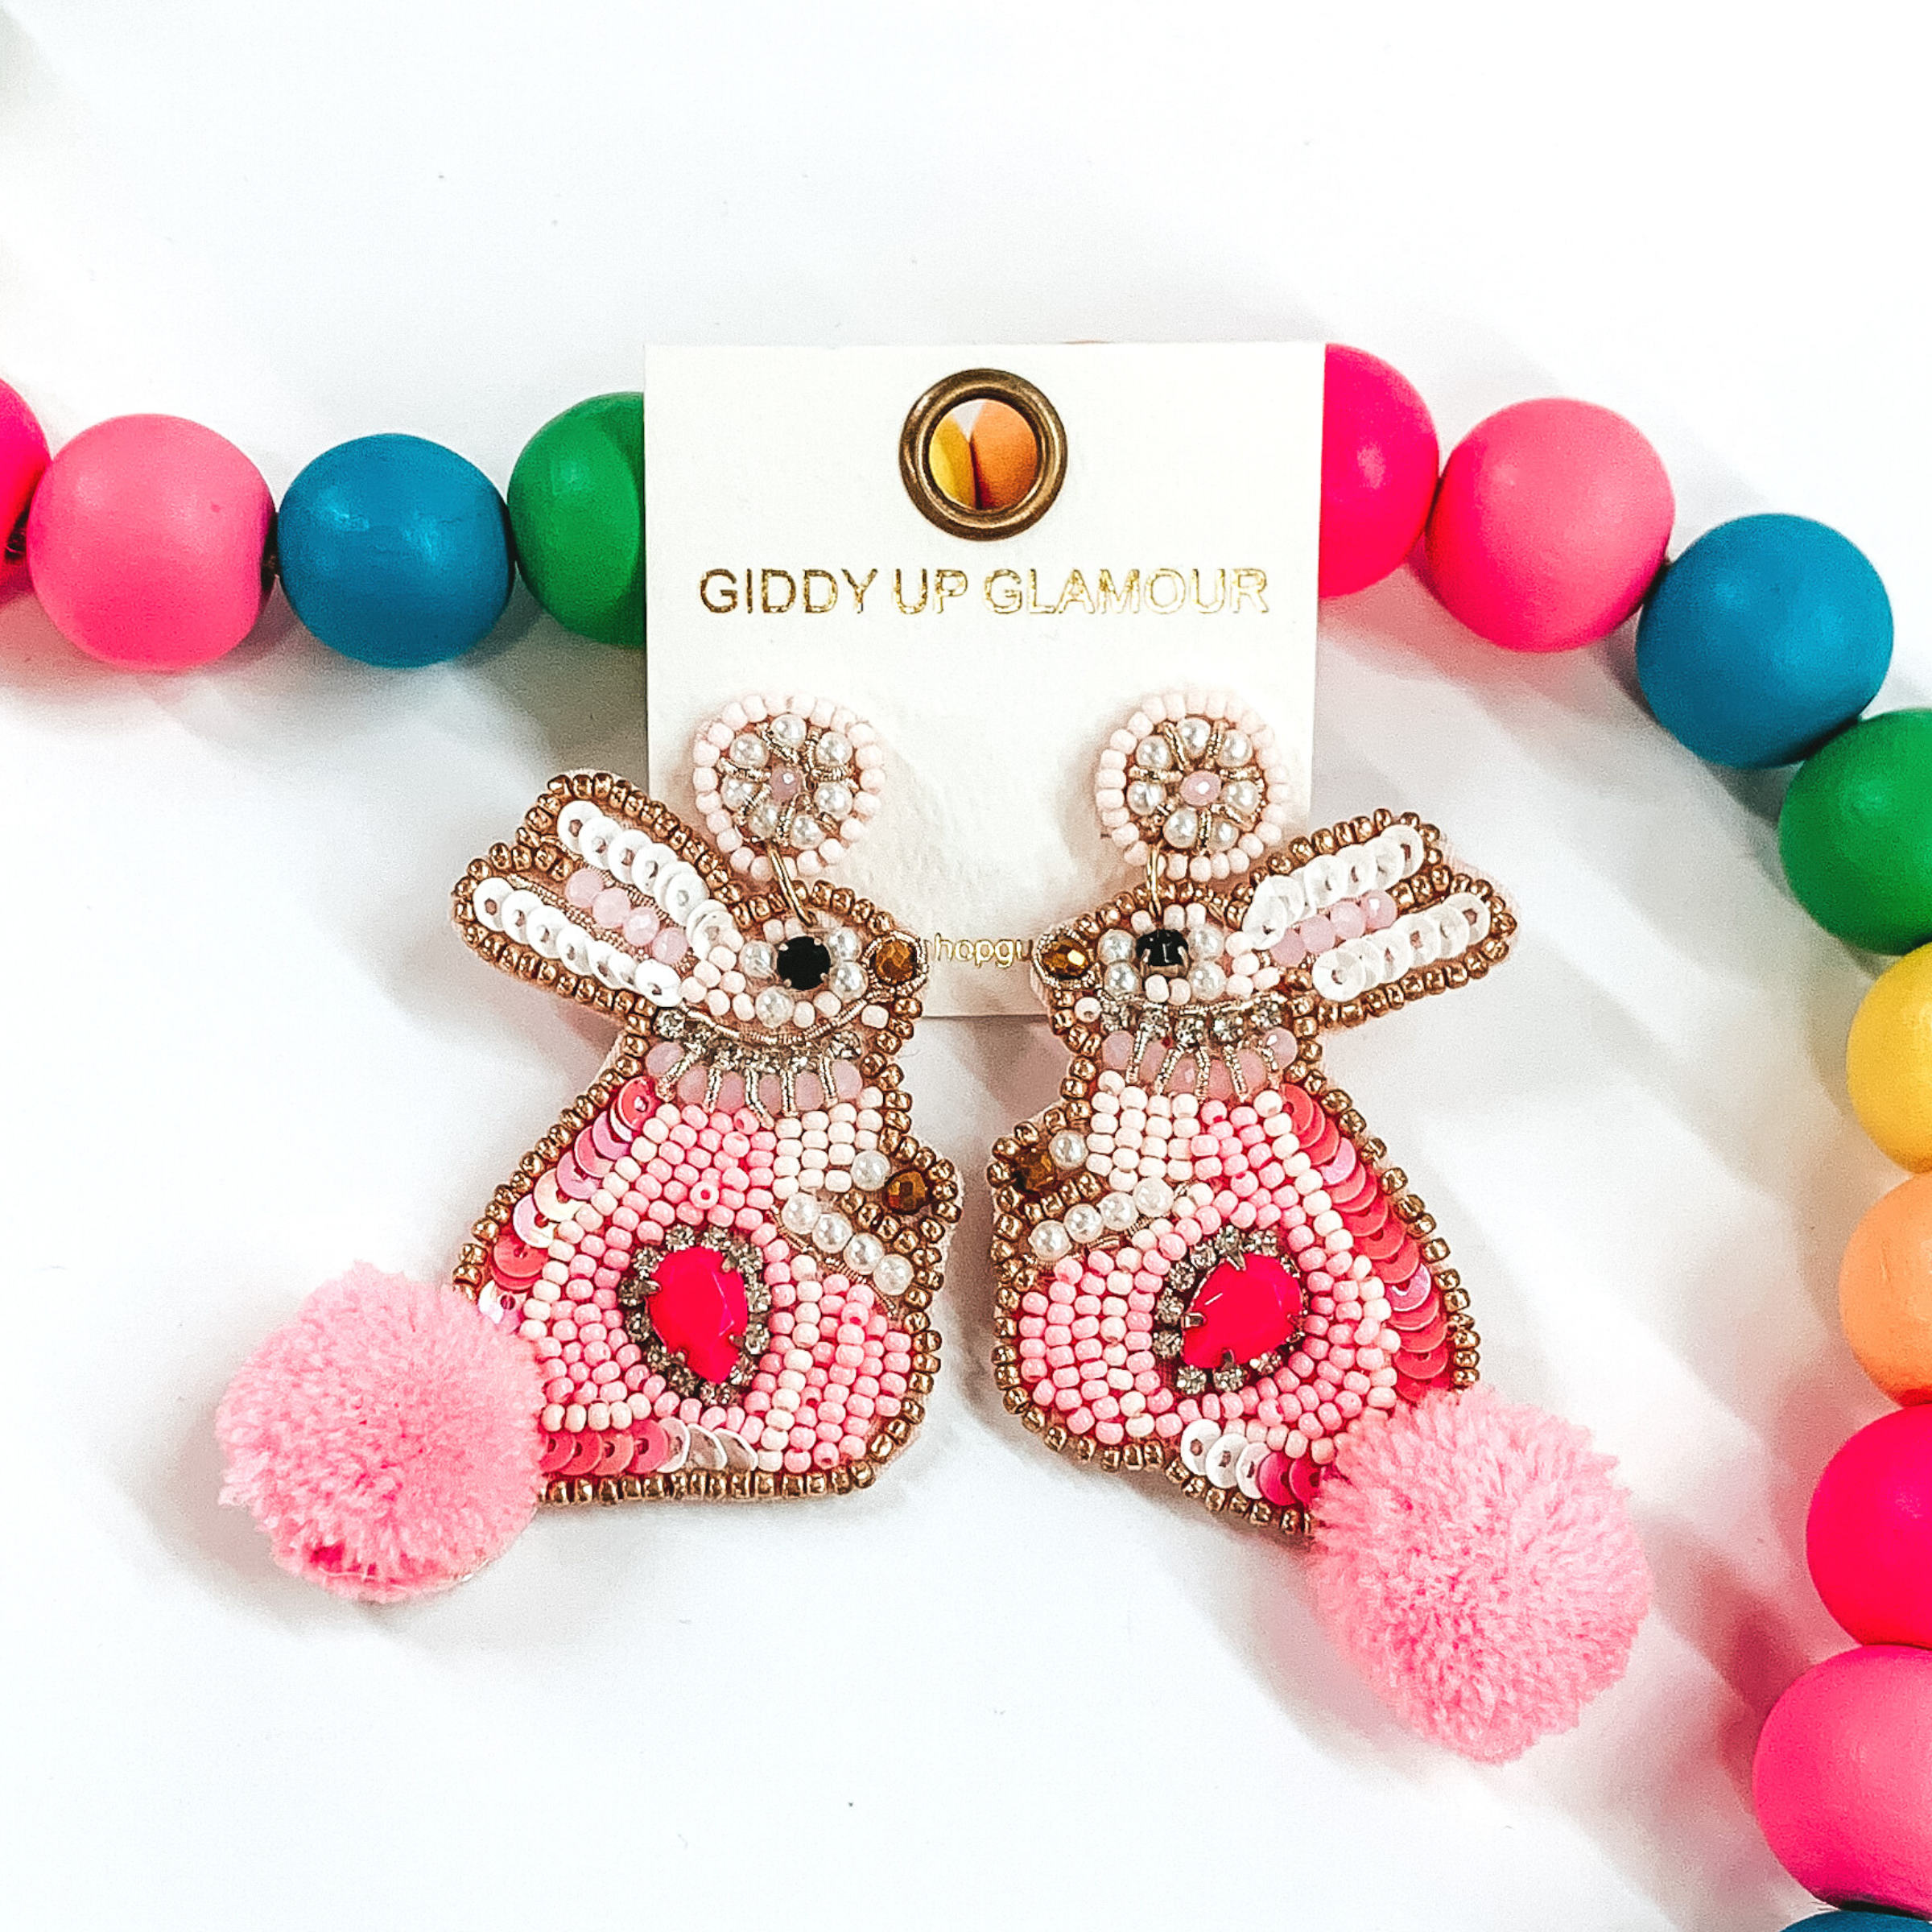 Beaded bunny rabbit shaped earrings. These earrings are outlined in gold beads, with detailing in light and dark pink. The bunny has a pink fluff ball tail. These earrings are pictured in front of some multicolored beads on a white background. 